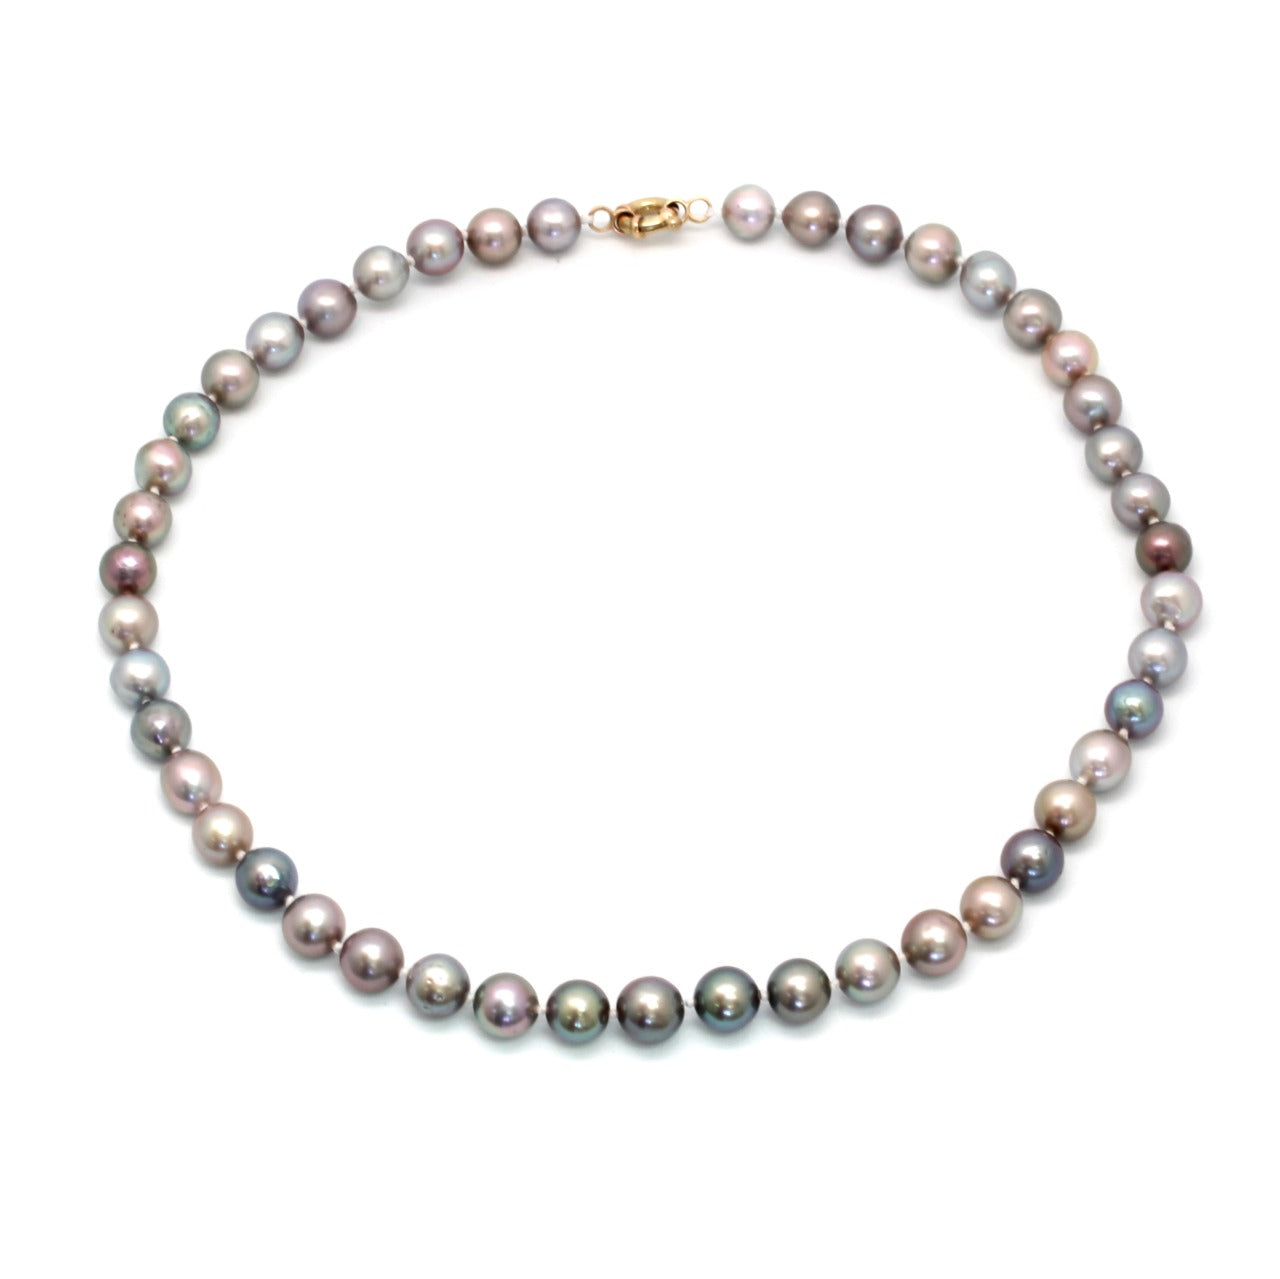 Make-Your-Own Cortez Pearl Necklace